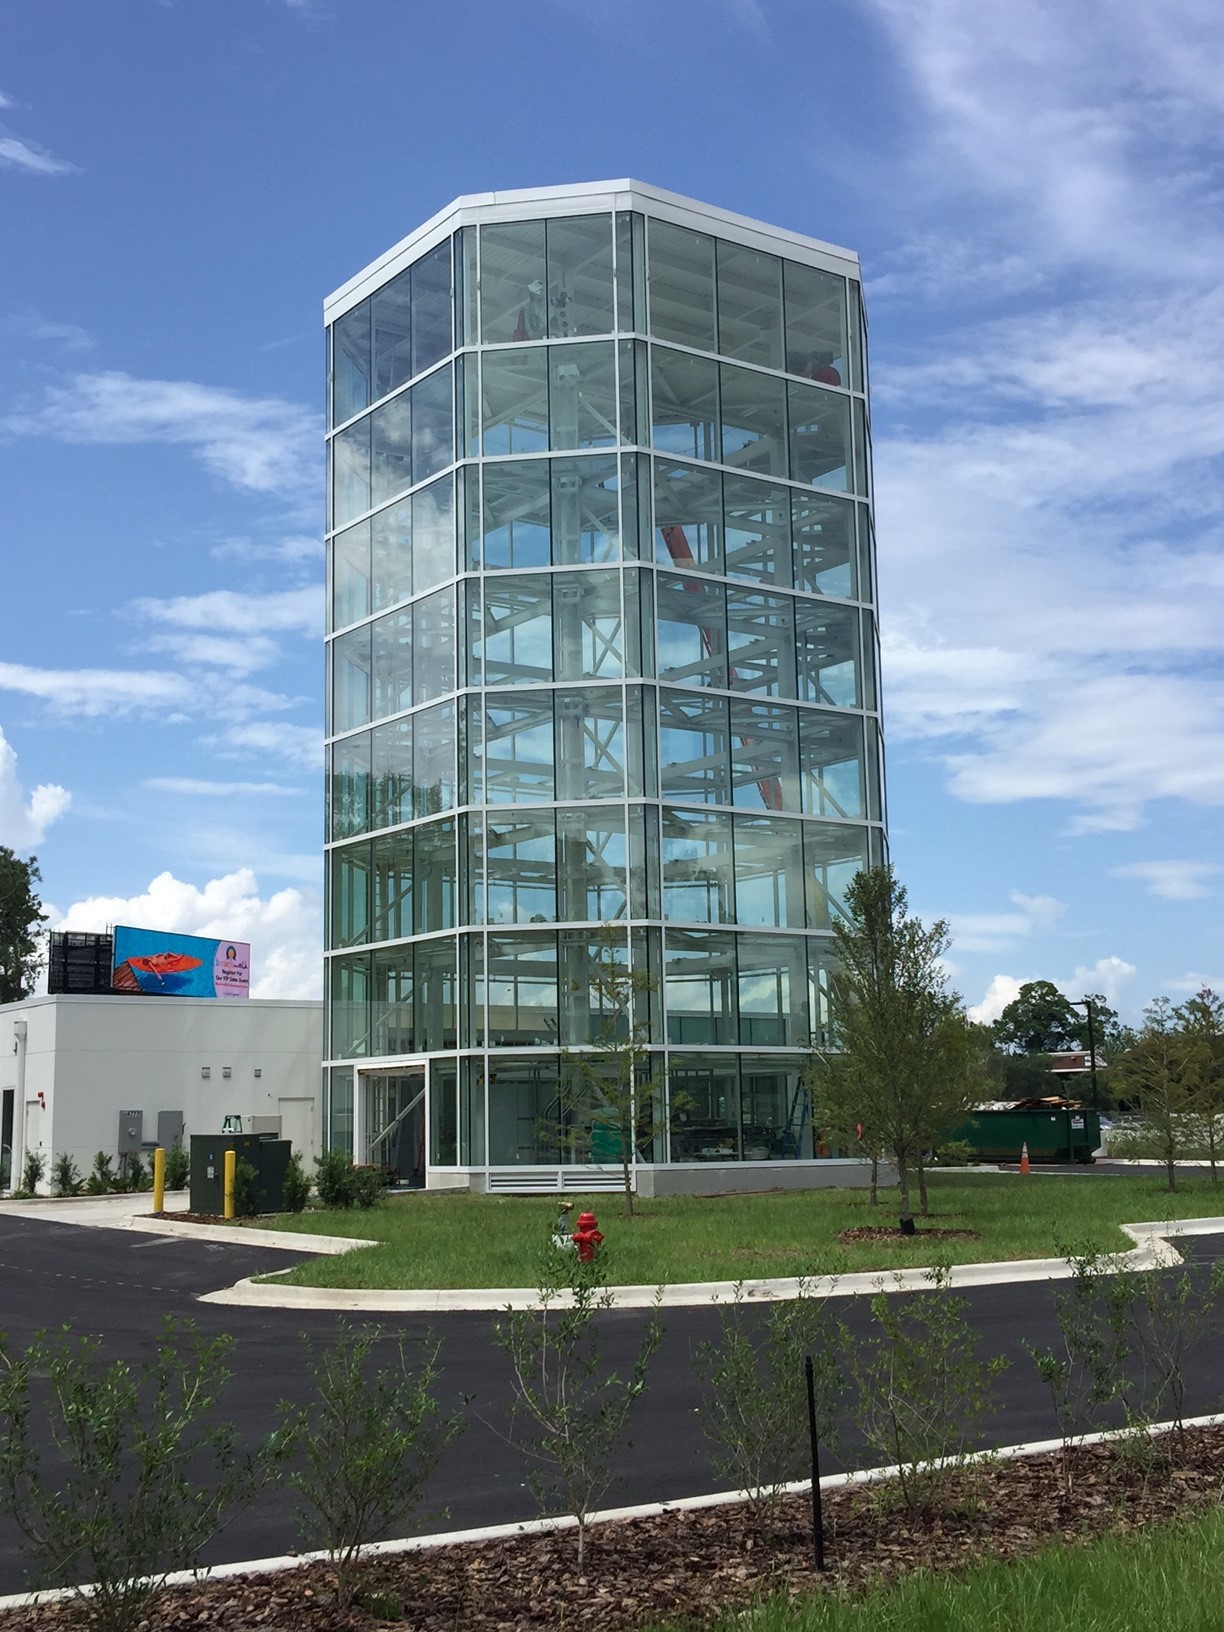 Carvana’s eight-story car-vending tower along Interstate 95 in South Jacksonville.